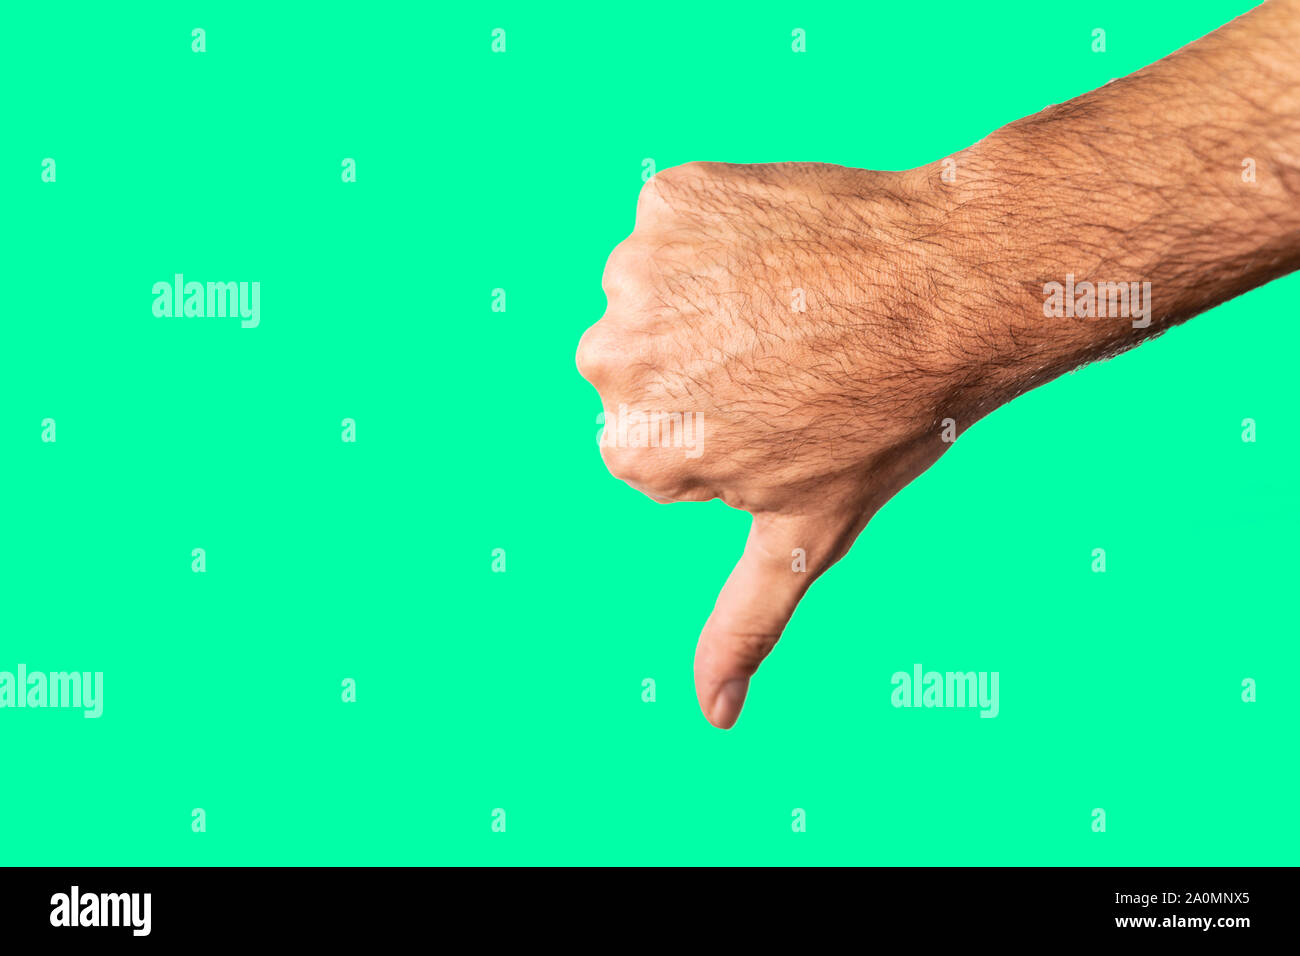 Thumb down hand sign isolated on a green background Stock Photo